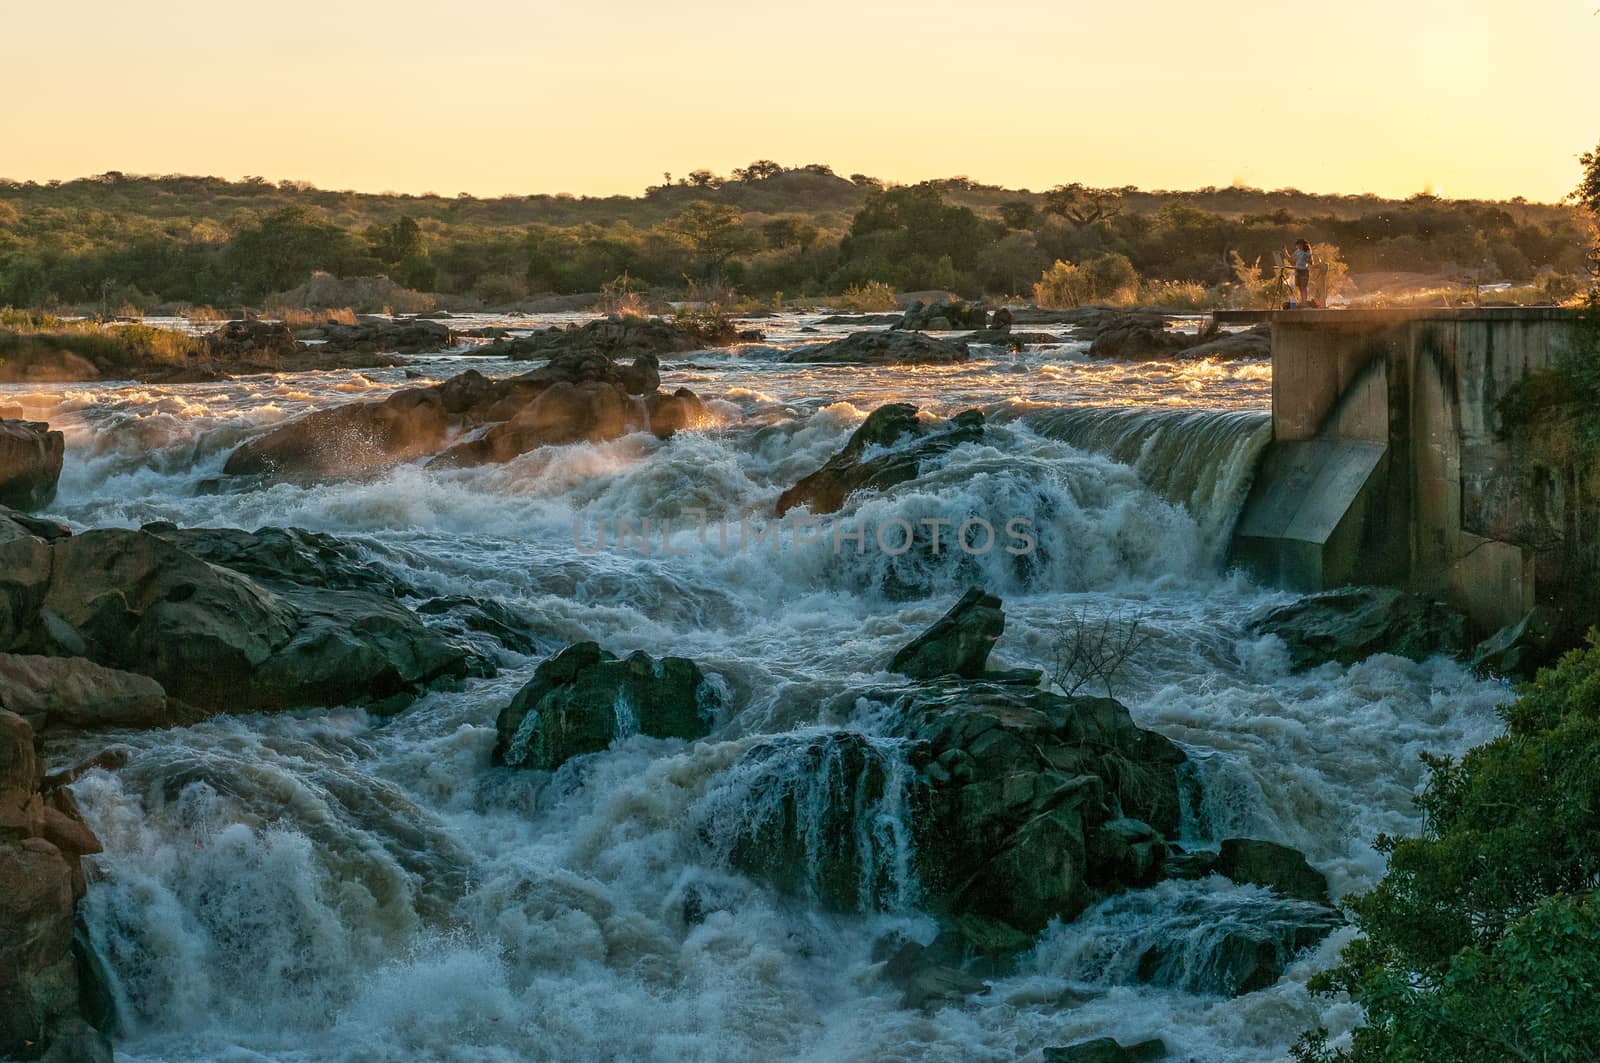 The top of the Ruacana waterfall in the Kunene River at sunset. An artist is visible. Angola is visible accross the river